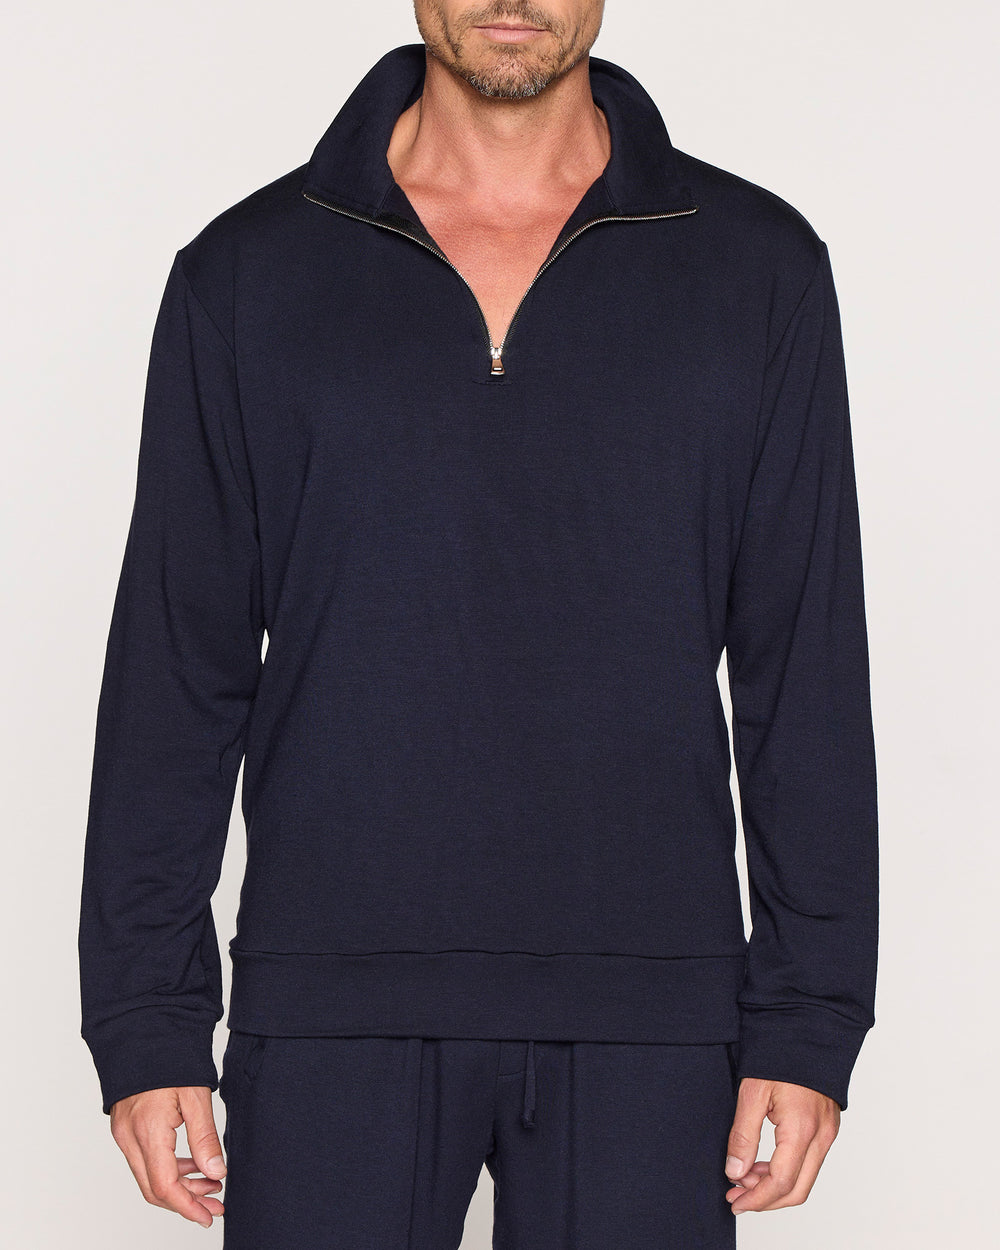 Mens 1/4 zip try on! Review in comments : r/lululemon